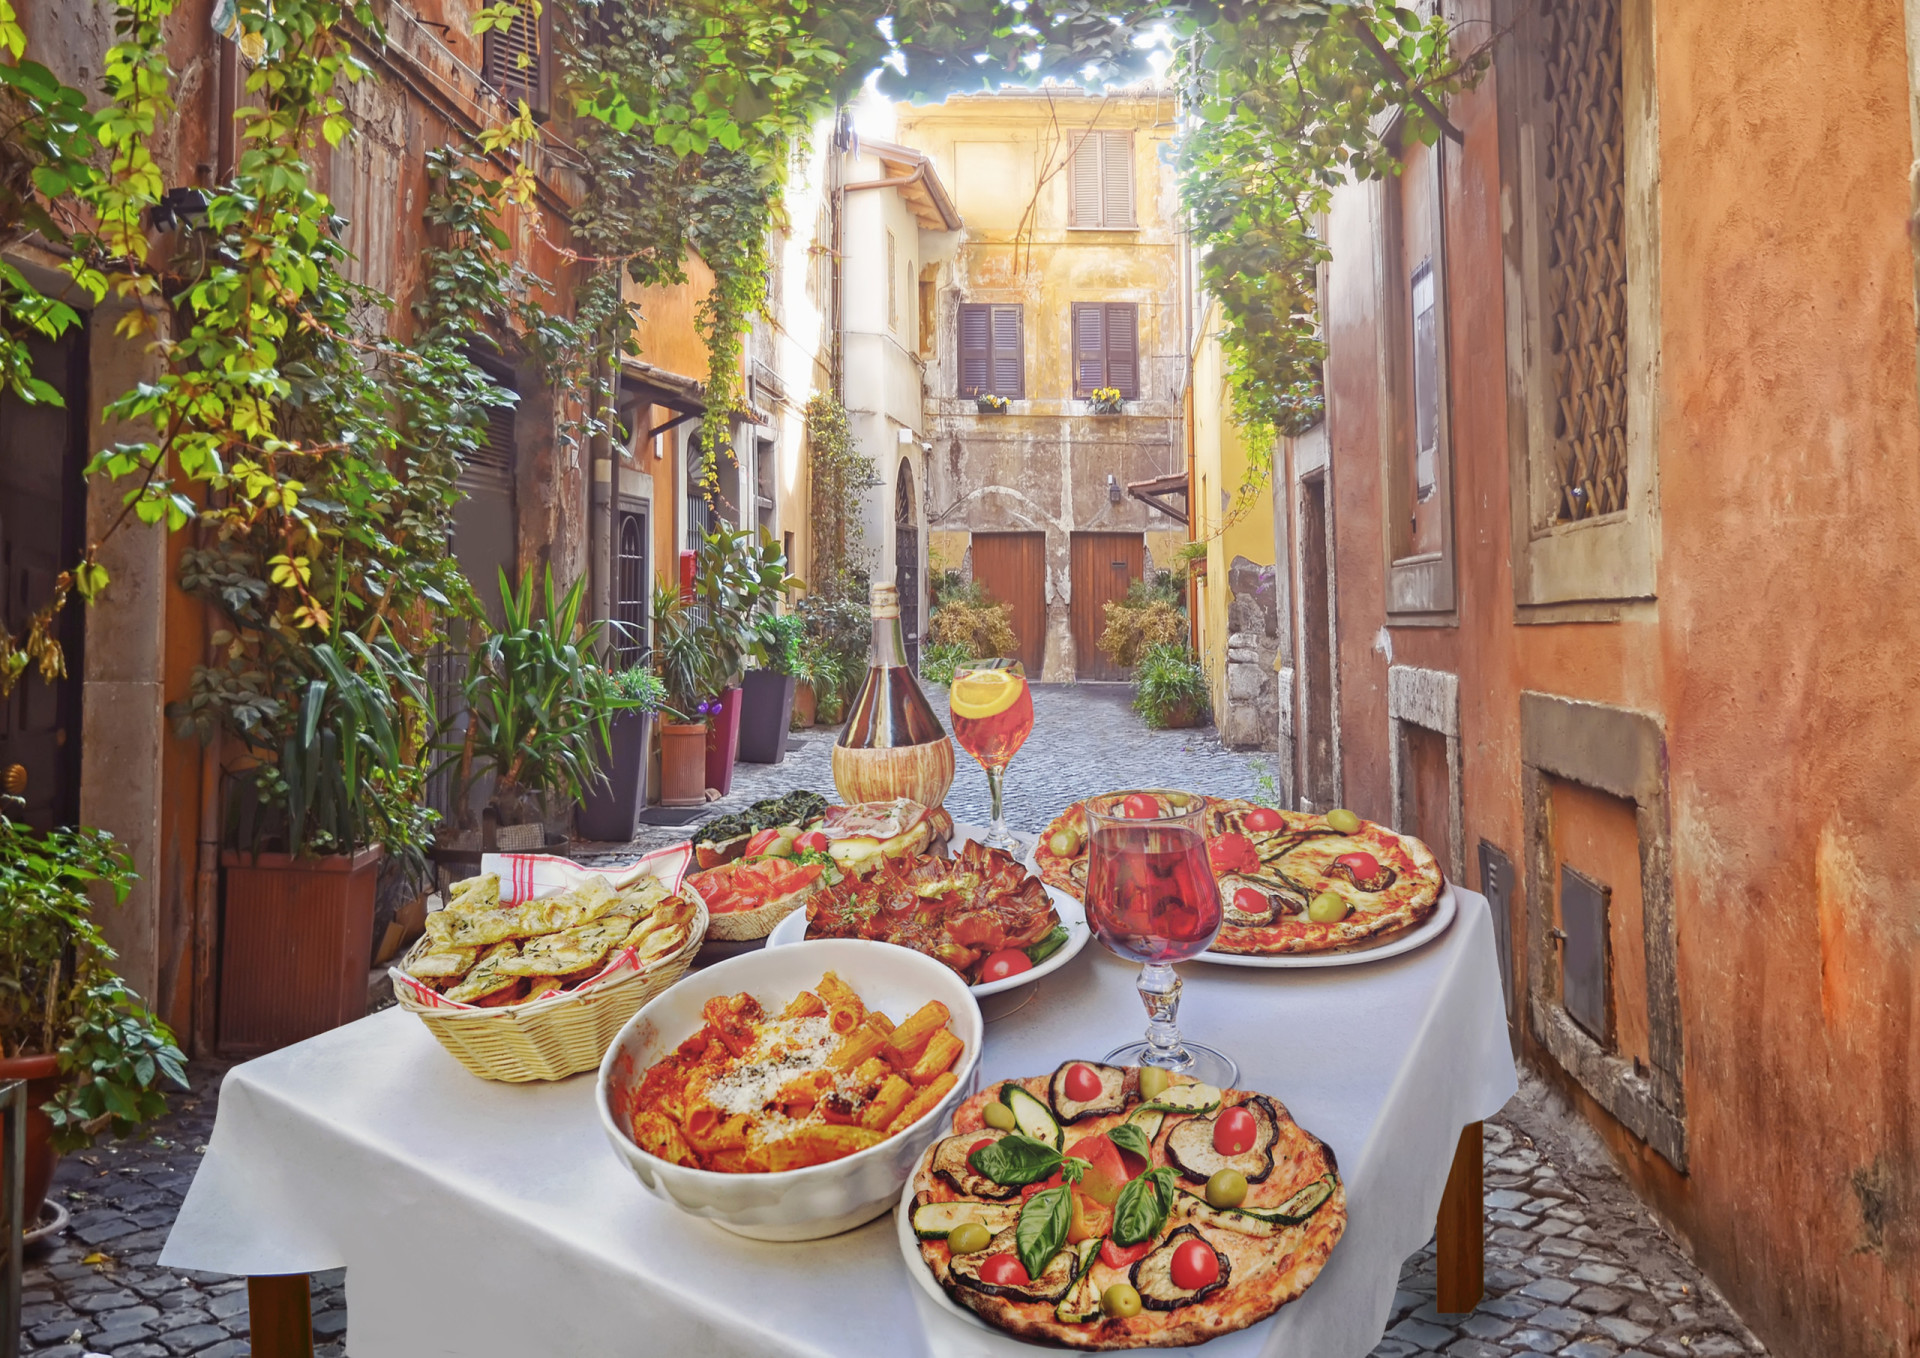 <p>Whether it’s pasta dishes and pizza in Italy or Parisian pastries in France, discovering regional specialties and culinary traditions will help you assimilate into the culture and make it feel more homey.</p><p><a href="https://www.msn.com/en-us/community/channel/vid-7xx8mnucu55yw63we9va2gwr7uihbxwc68fxqp25x6tg4ftibpra?cvid=94631541bc0f4f89bfd59158d696ad7e">Follow us and access great exclusive content every day</a></p>